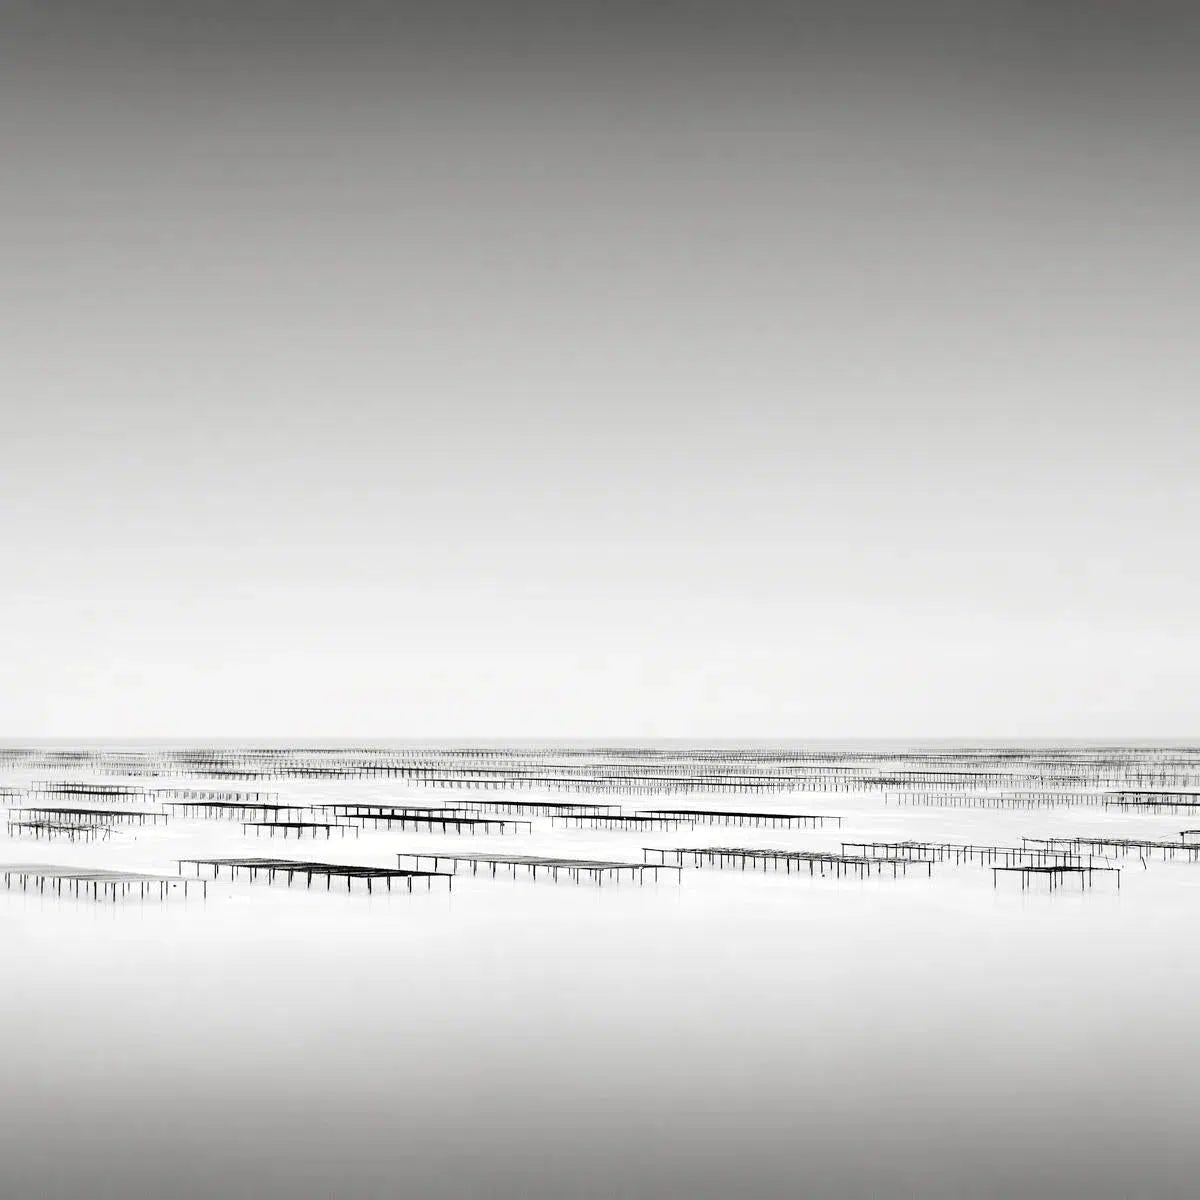 Oyster Beds, Thau, France, by Jonathan Chritchley-PurePhoto